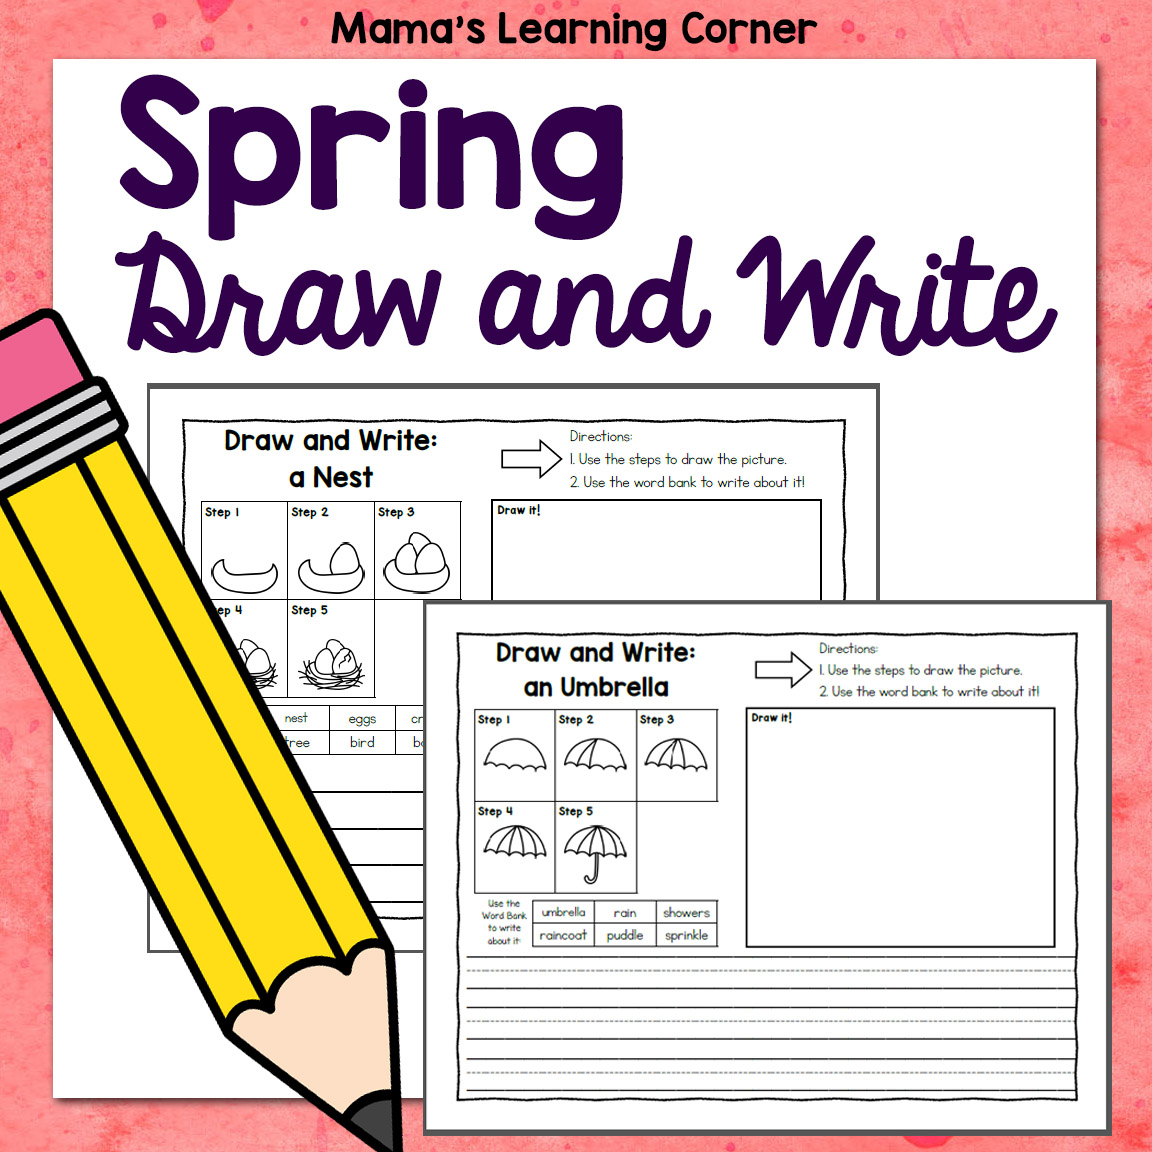 spring-directed-draw-and-write-mamas-learning-corner